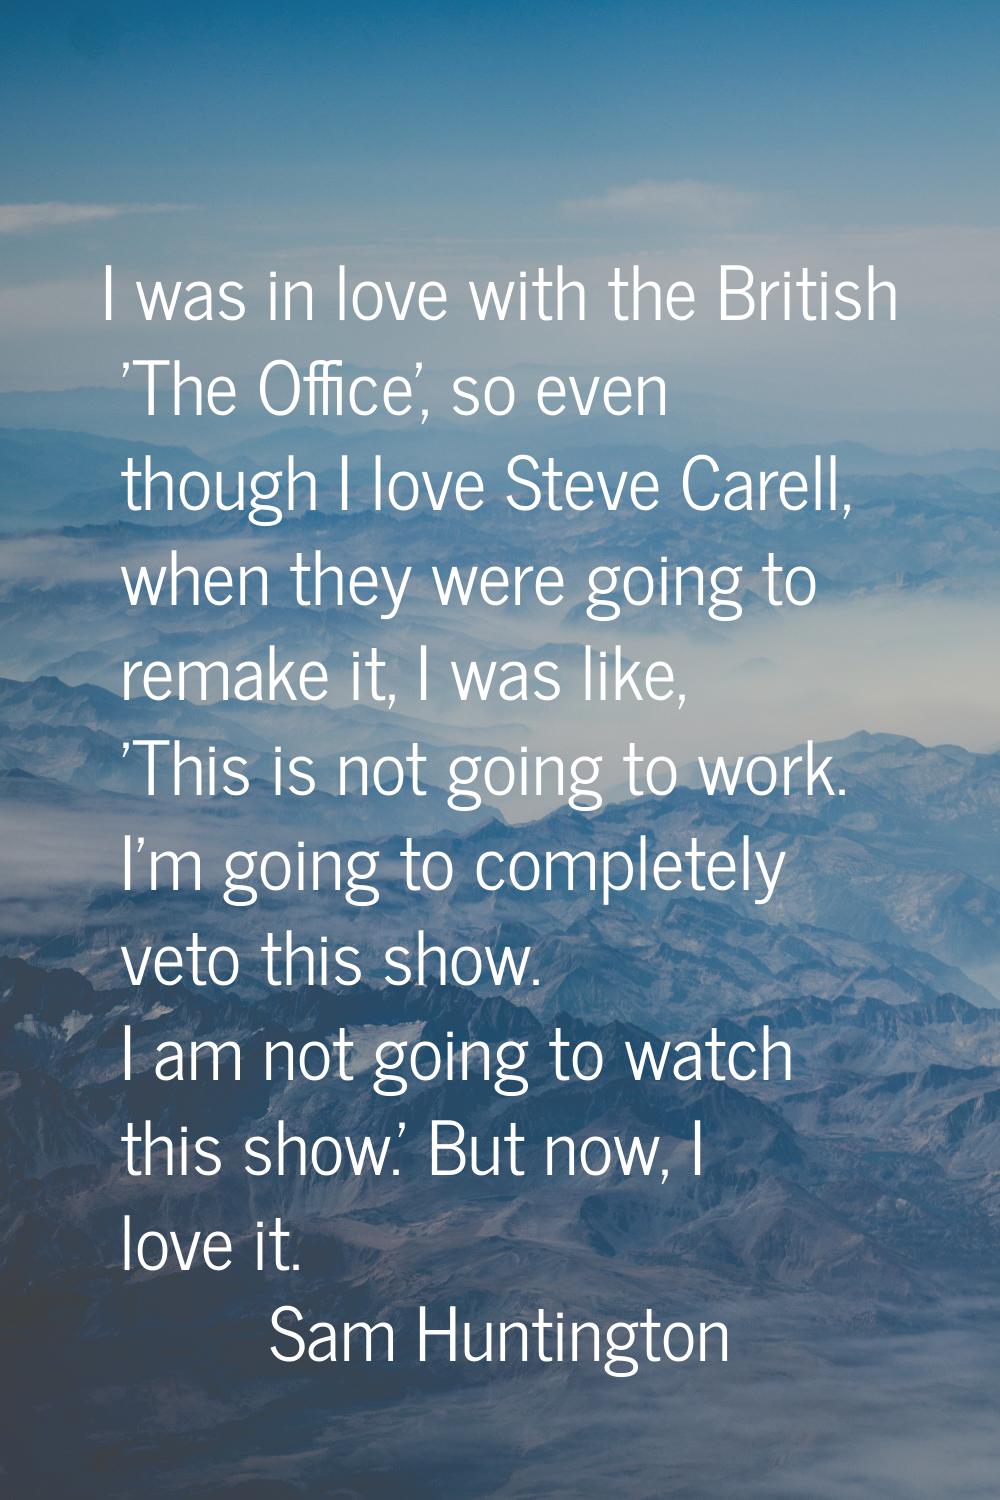 I was in love with the British 'The Office', so even though I love Steve Carell, when they were goi